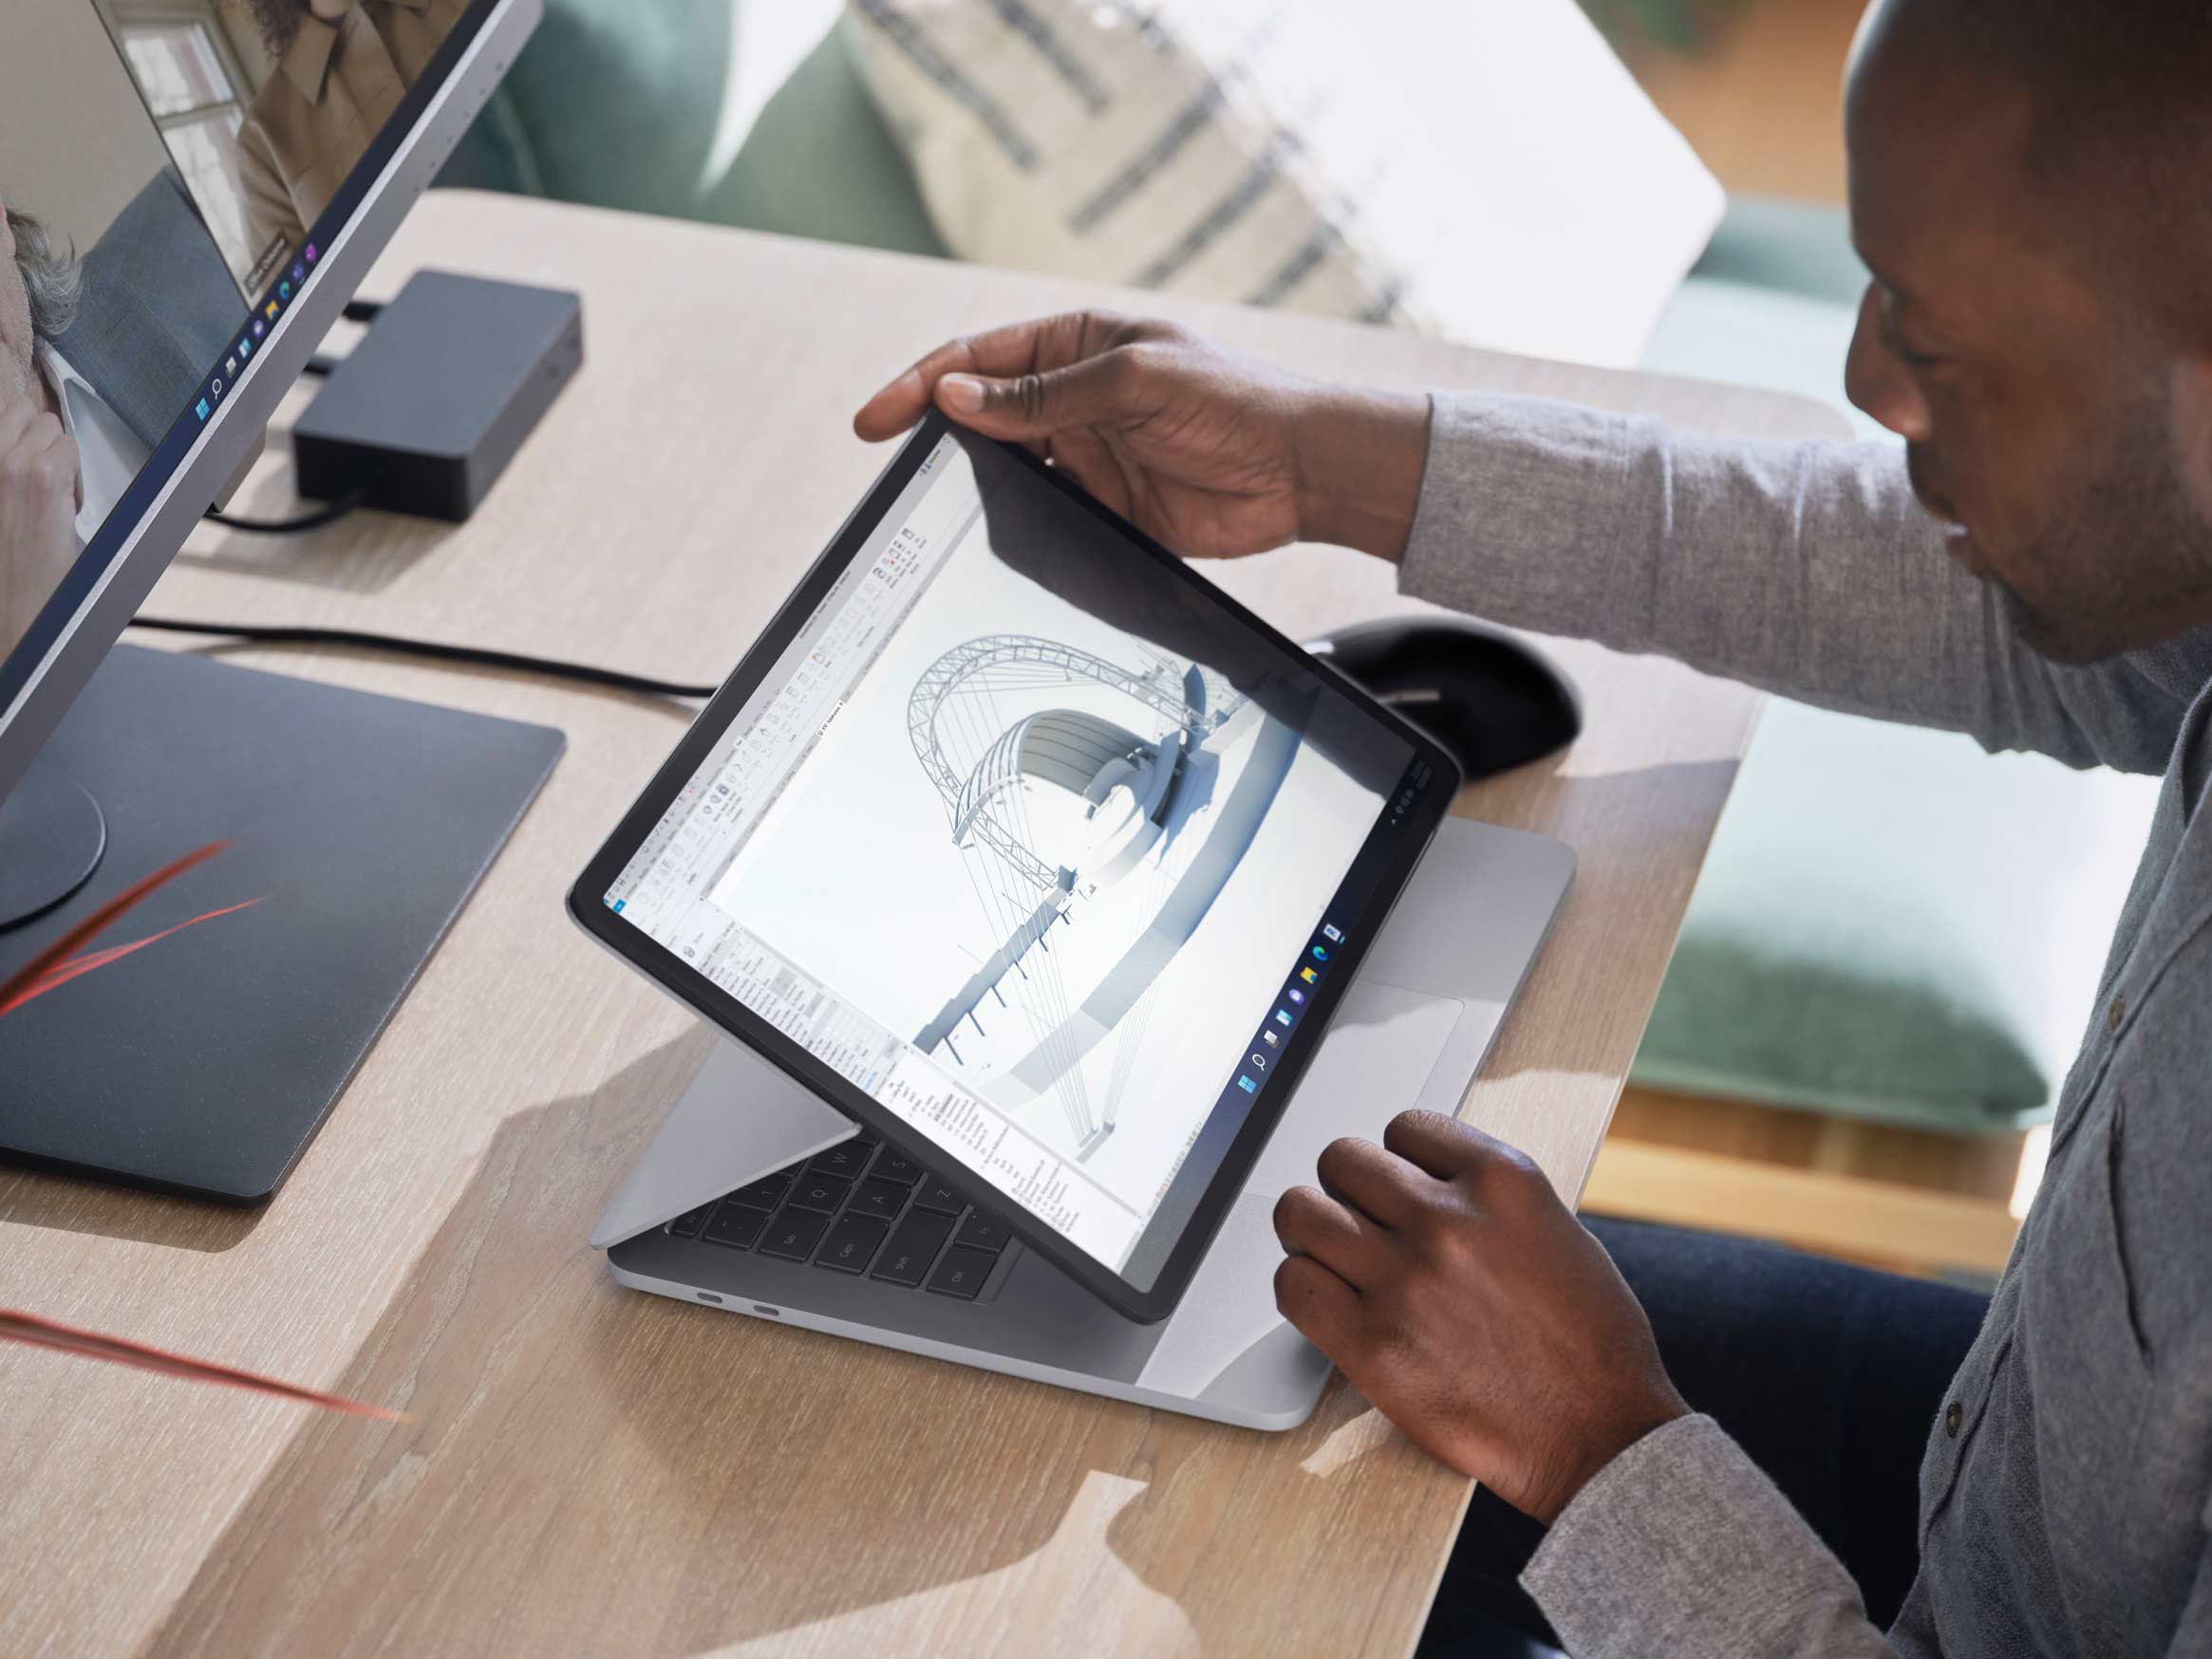 Surface Laptop studio being used